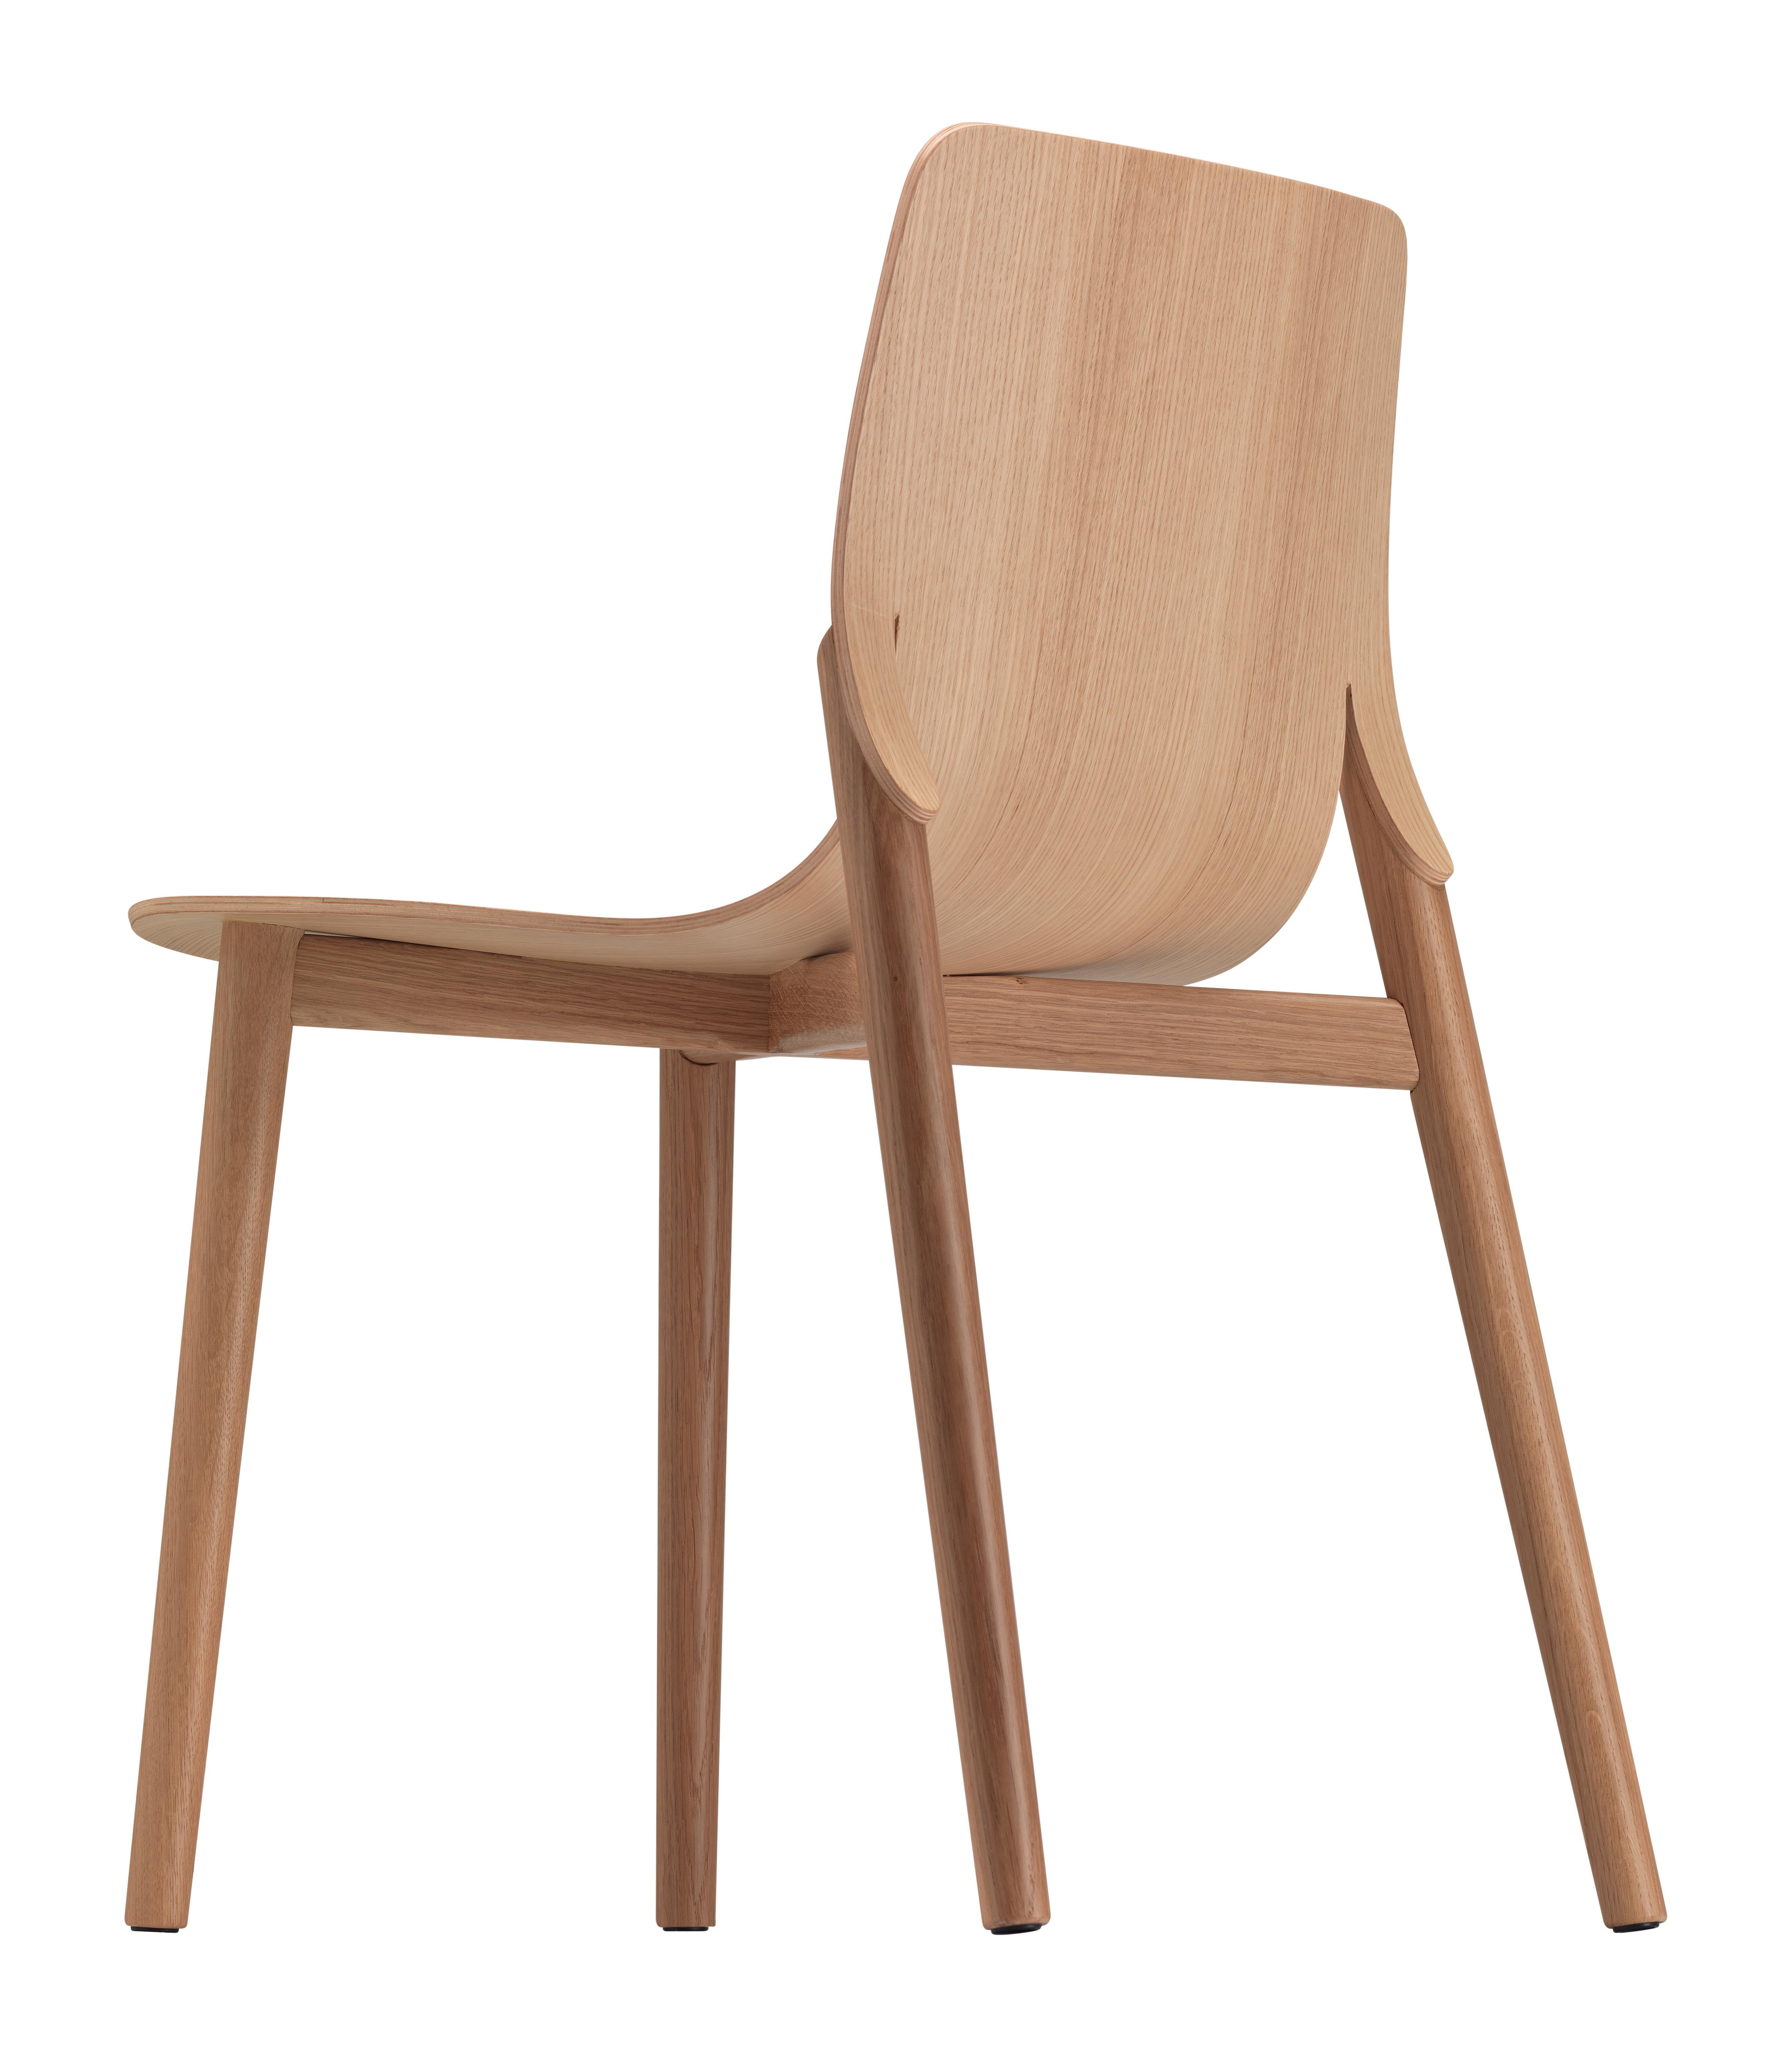 Alias 047 Kayak Chair in Natural Oak Seat and Frame by Patrick Norguet

Chair with solid oak or beech structure and Seat in curved oak or beech veneered plywood. Finishes: transparent varnish, walnut, dark oak, or coloured stains. On request, the